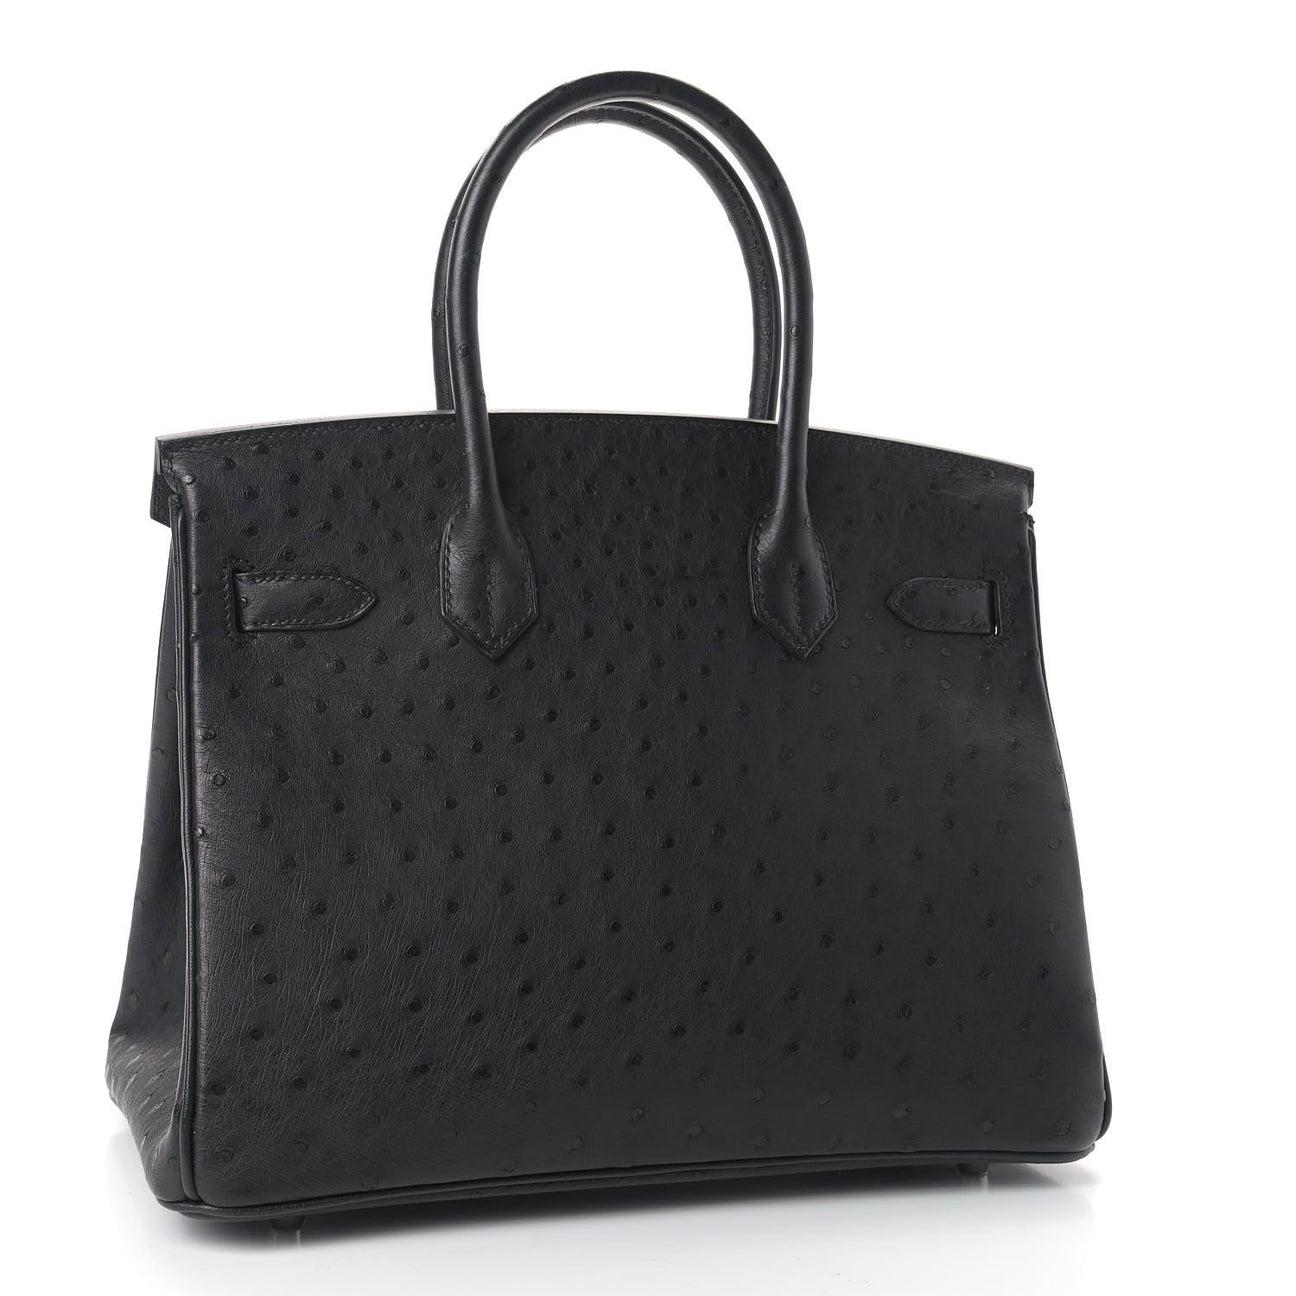 HERMES NEW Black Ostrich Exotic Leather Palladium Top Handle Tote Bag 1